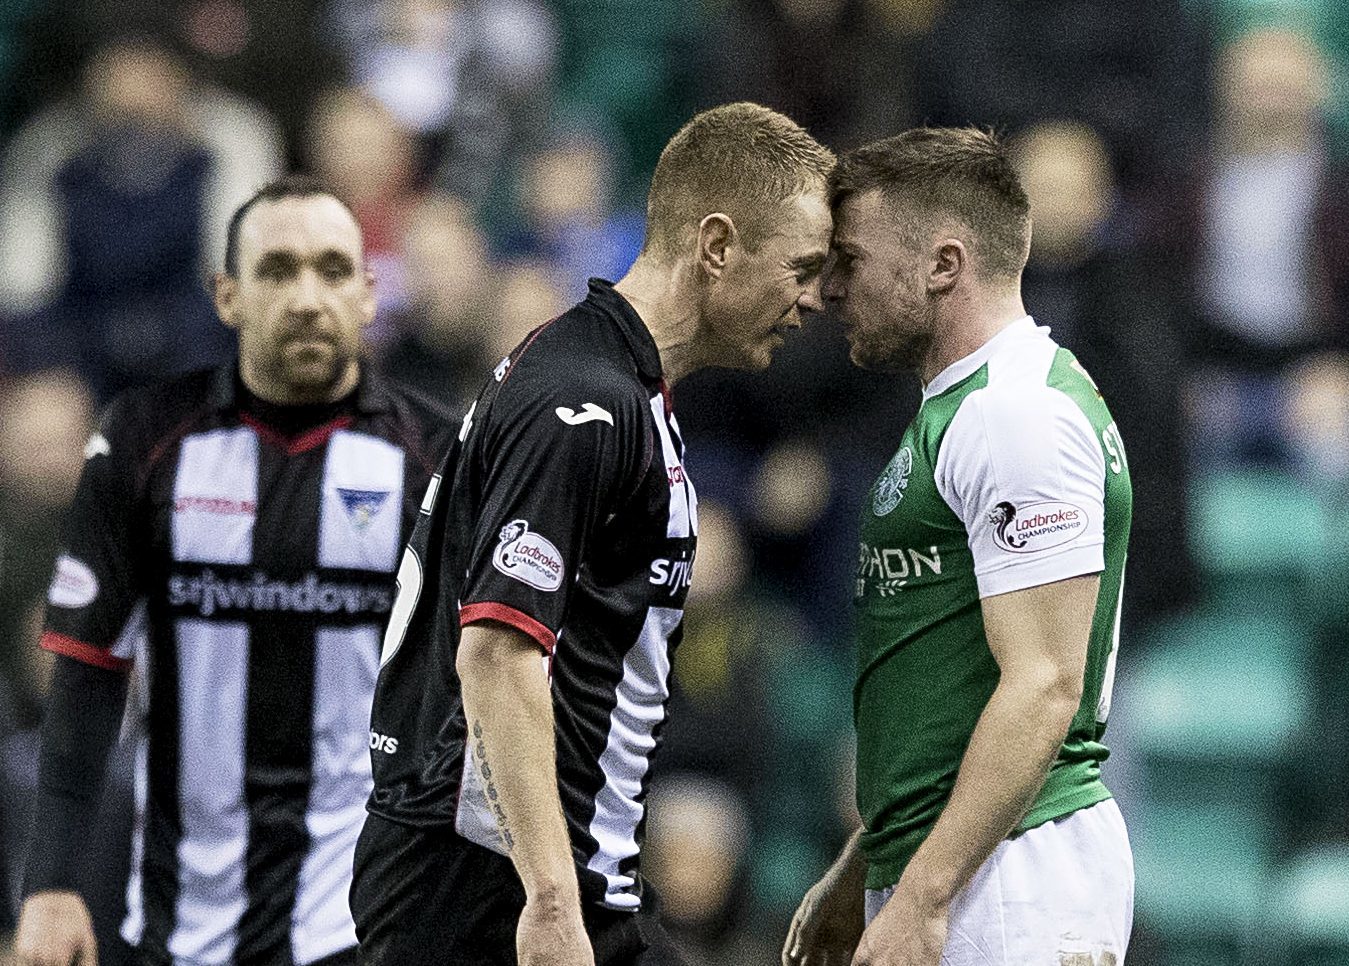 Andy Geggan gets up close with Hibernian's Lewis Stevenson.